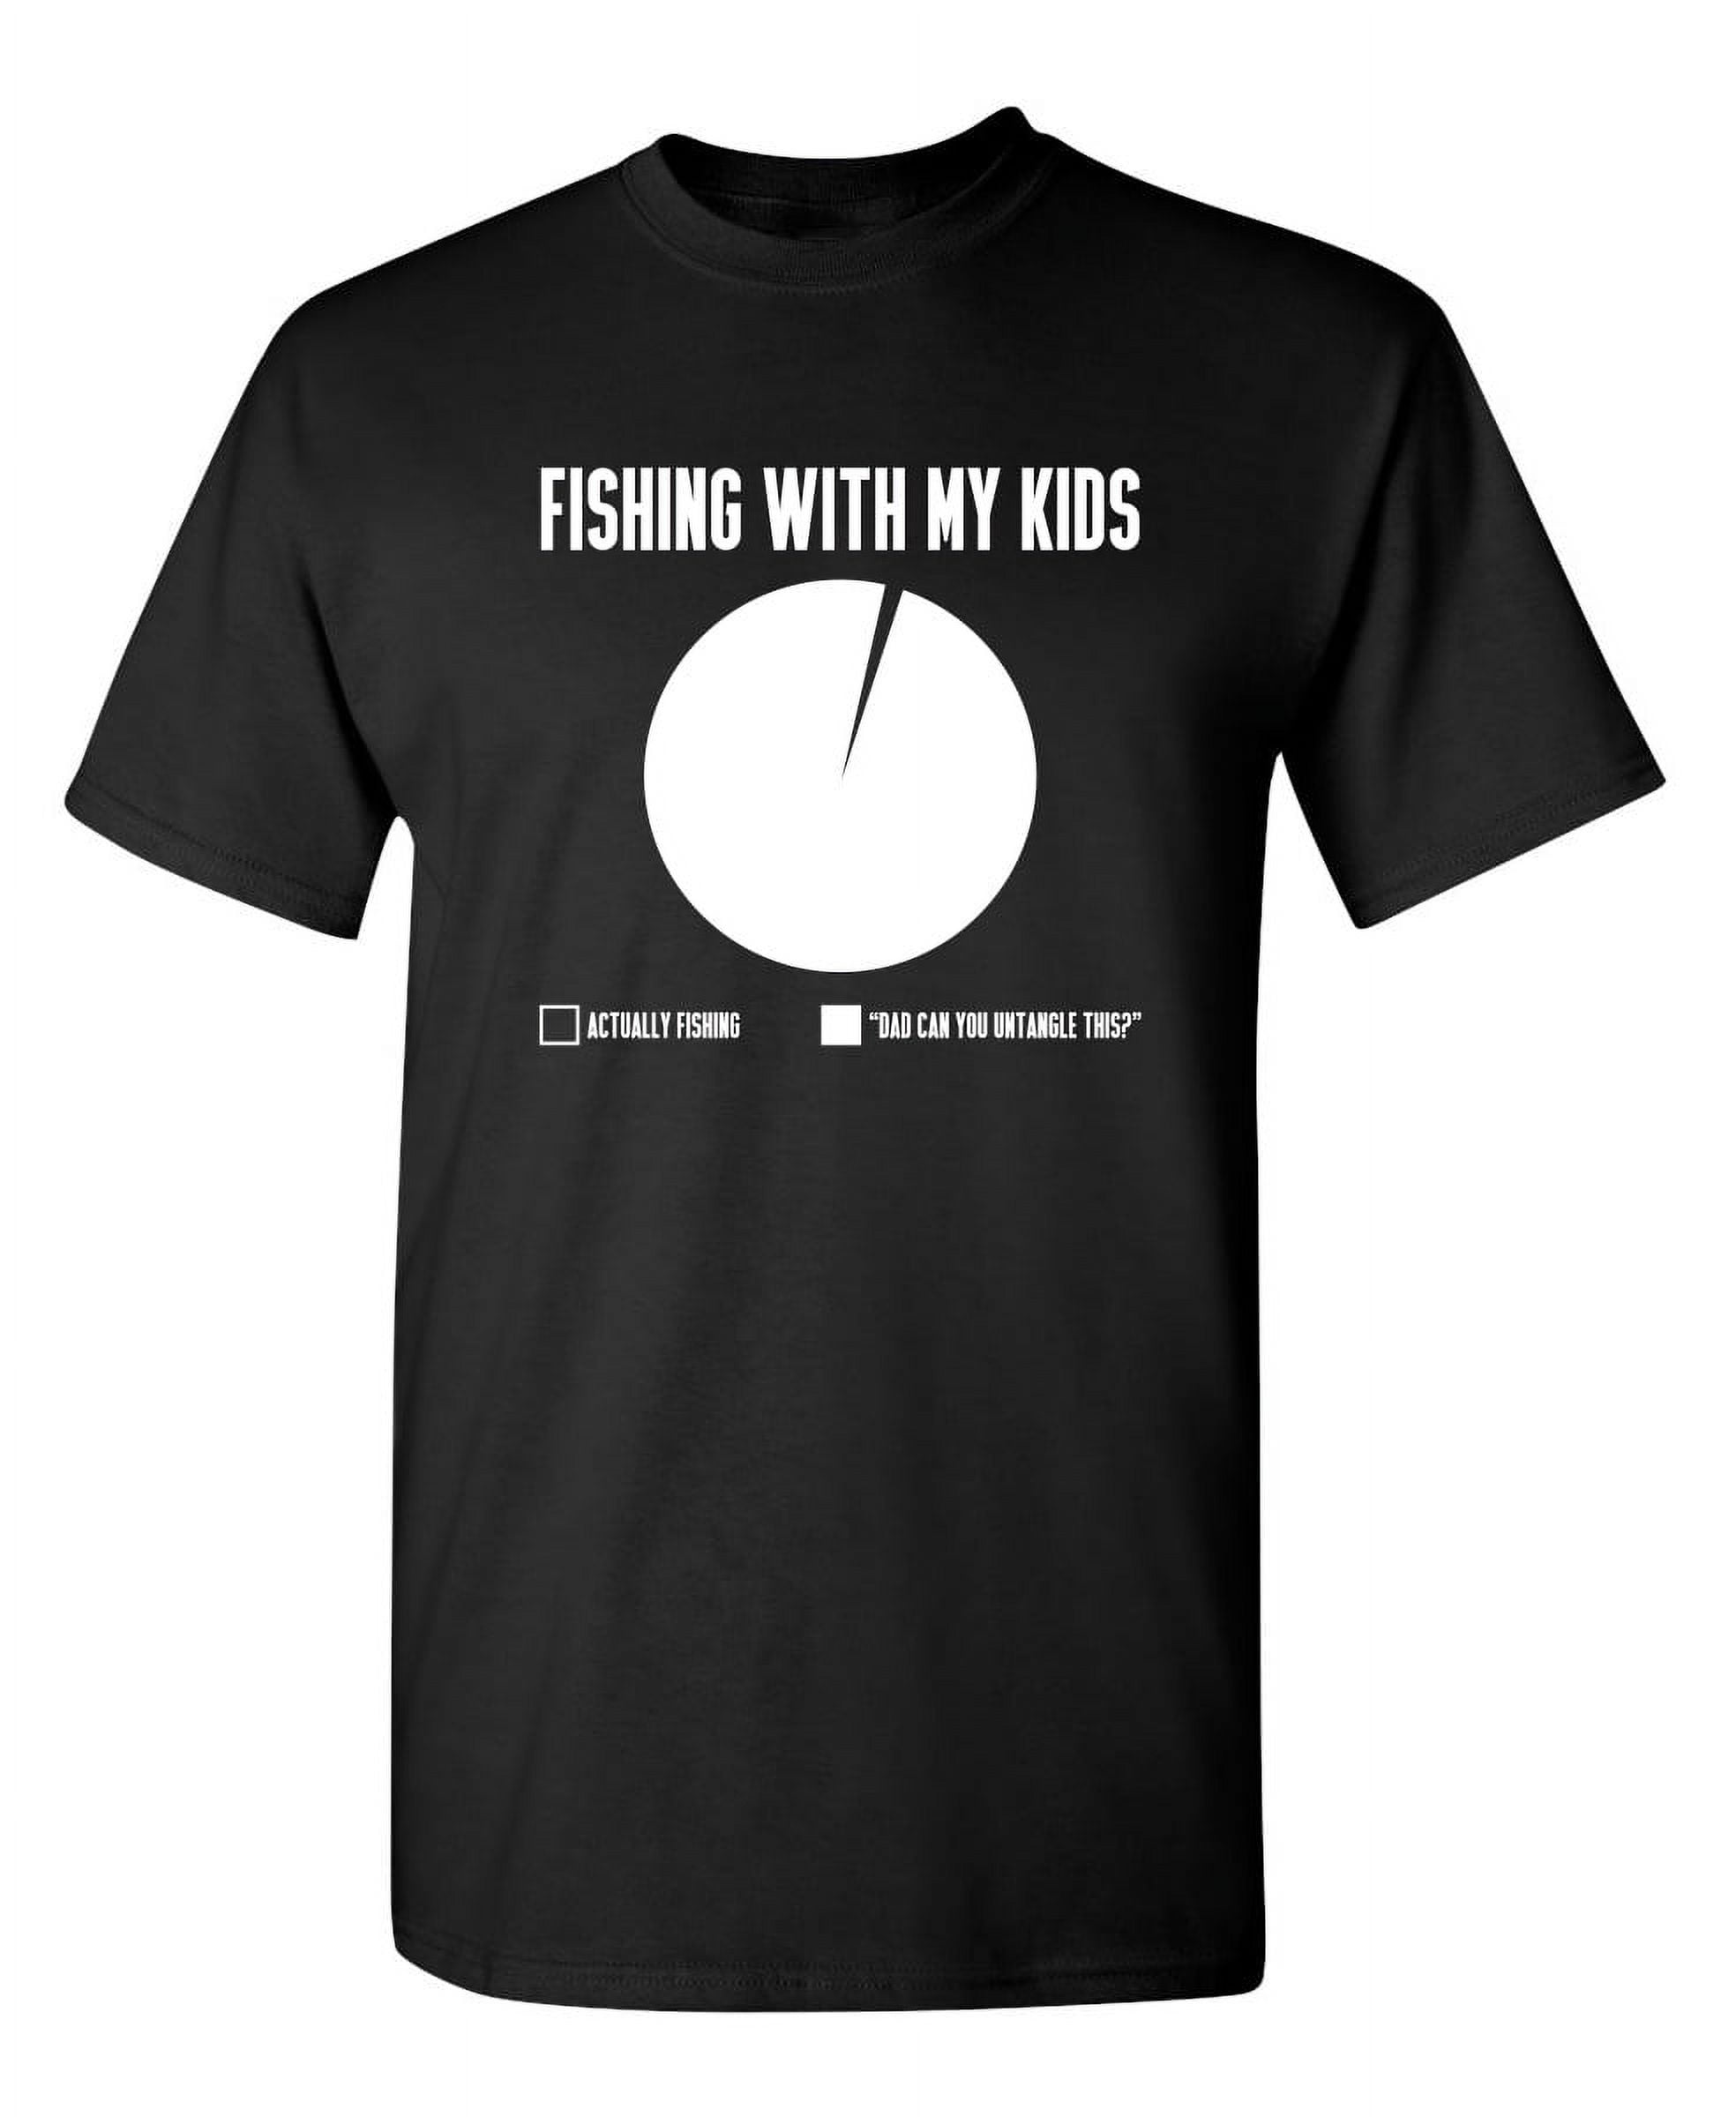 Fishing With Kids Sarcastic Humor Graphic Novelty Super Soft Ring Spun Funny  T Shirt 